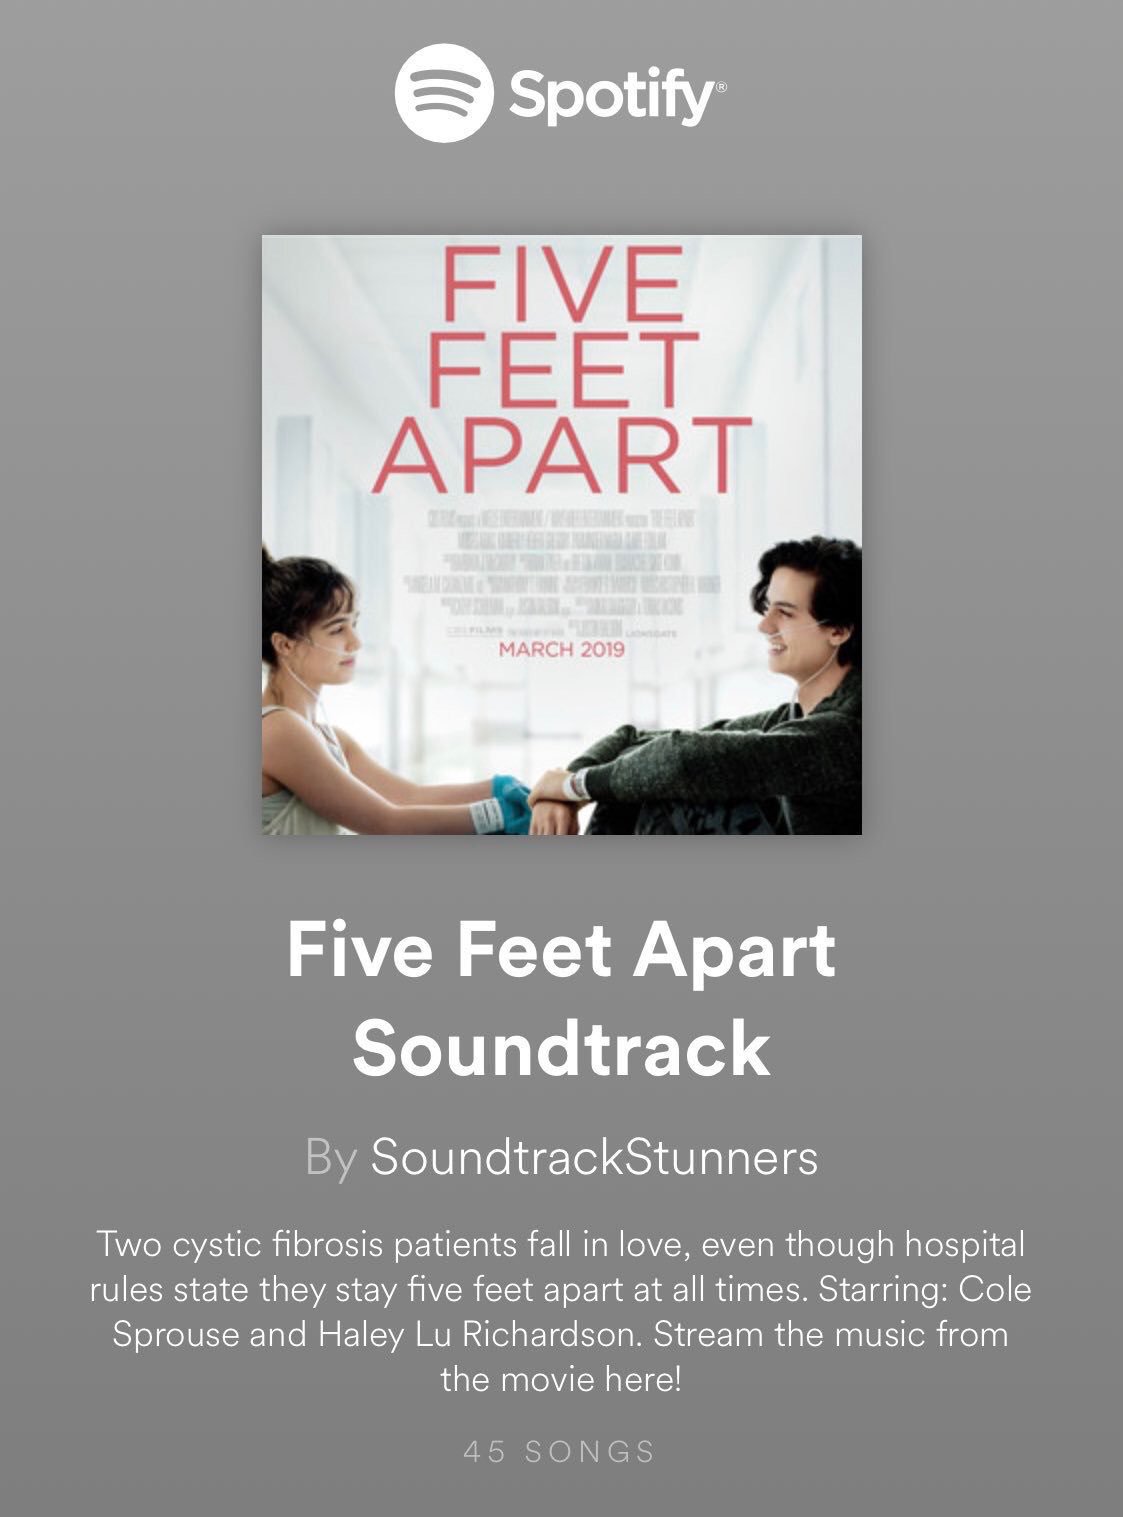 Selena Gomez Worldwide On Twitter Back To You Is Included In The Soundtrack Of Five Feet Apart Movie Httpstcoea2vkc6b5i Twitter